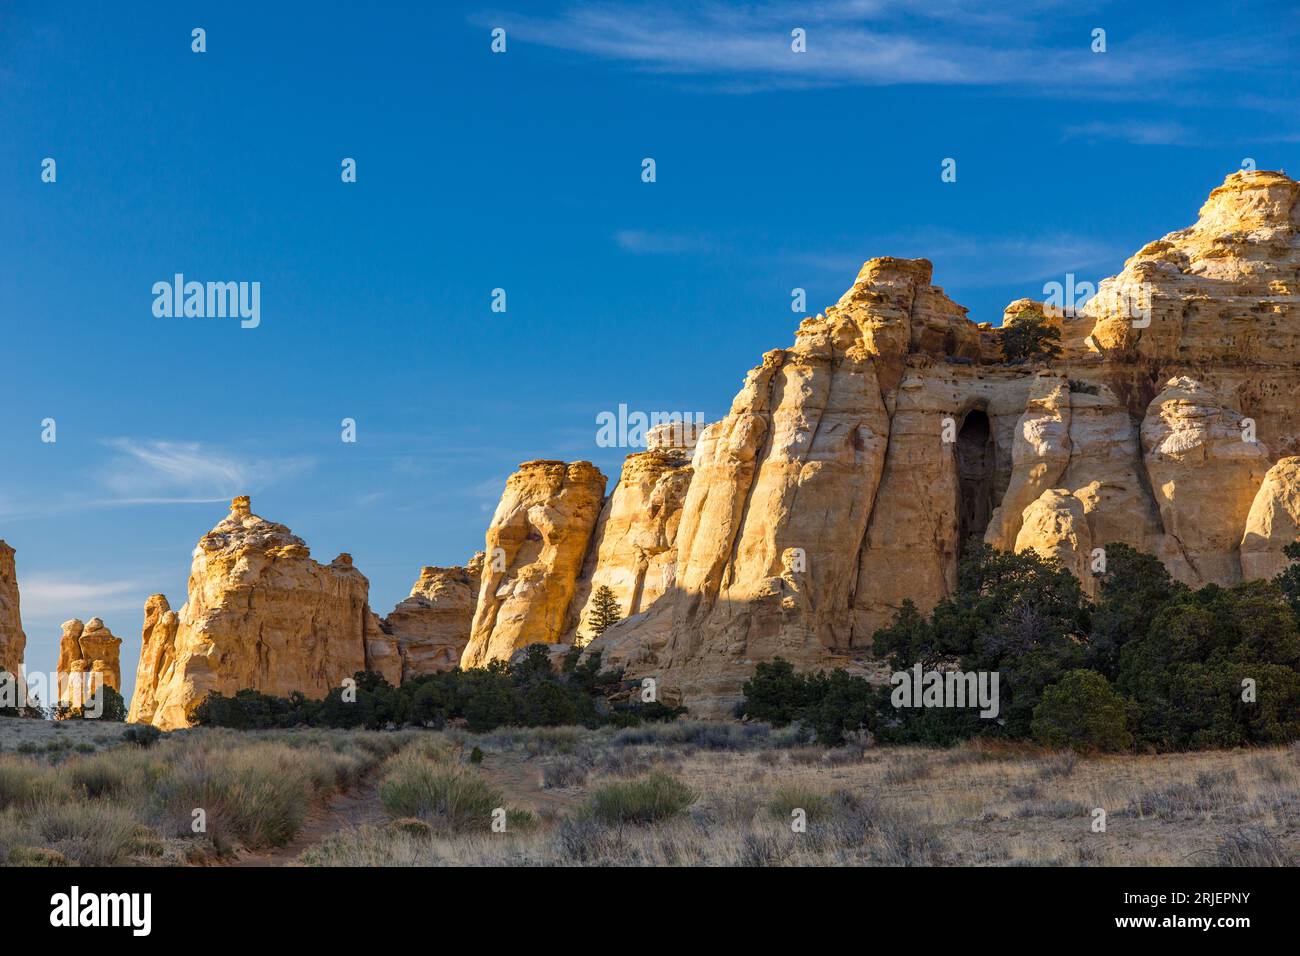 Colorful hoodoos, or rock formations, on  a Navajo Sandstone mesa in the Head of Sinbad area of the San Rafael Swell in Utah. Stock Photo